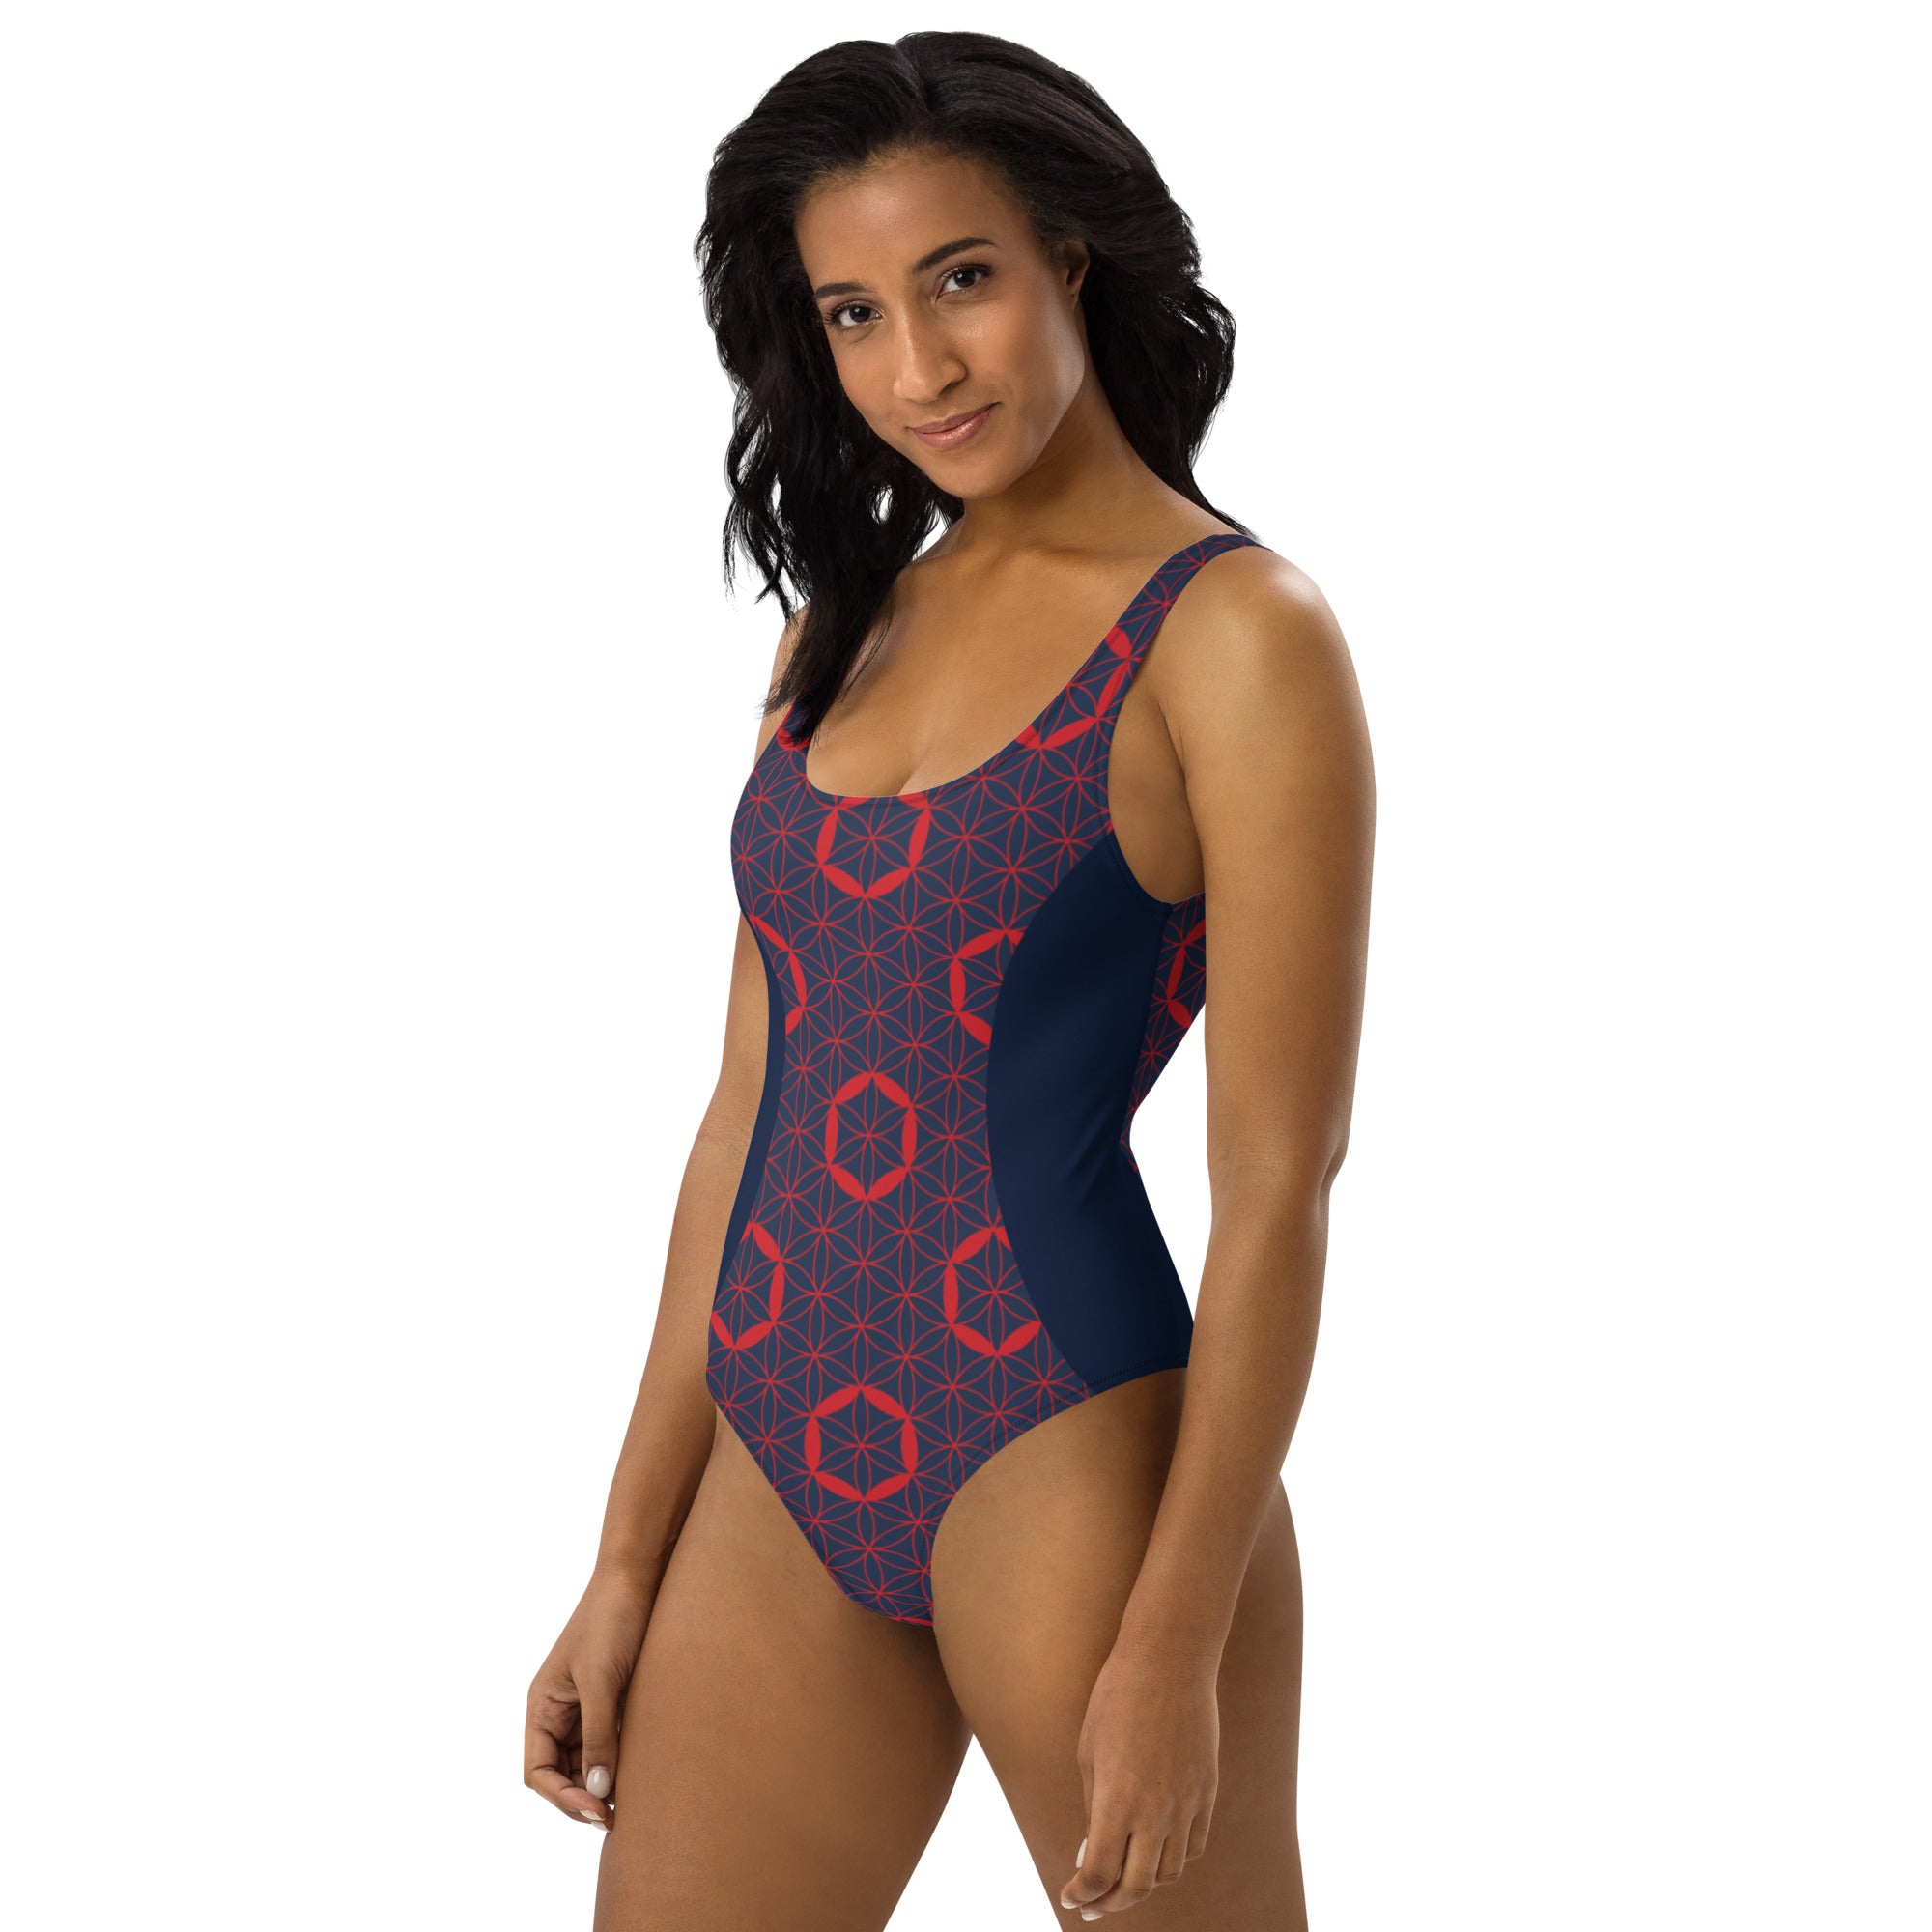 Flower of Life Fishman Donuts One-Piece Phish Swimsuit